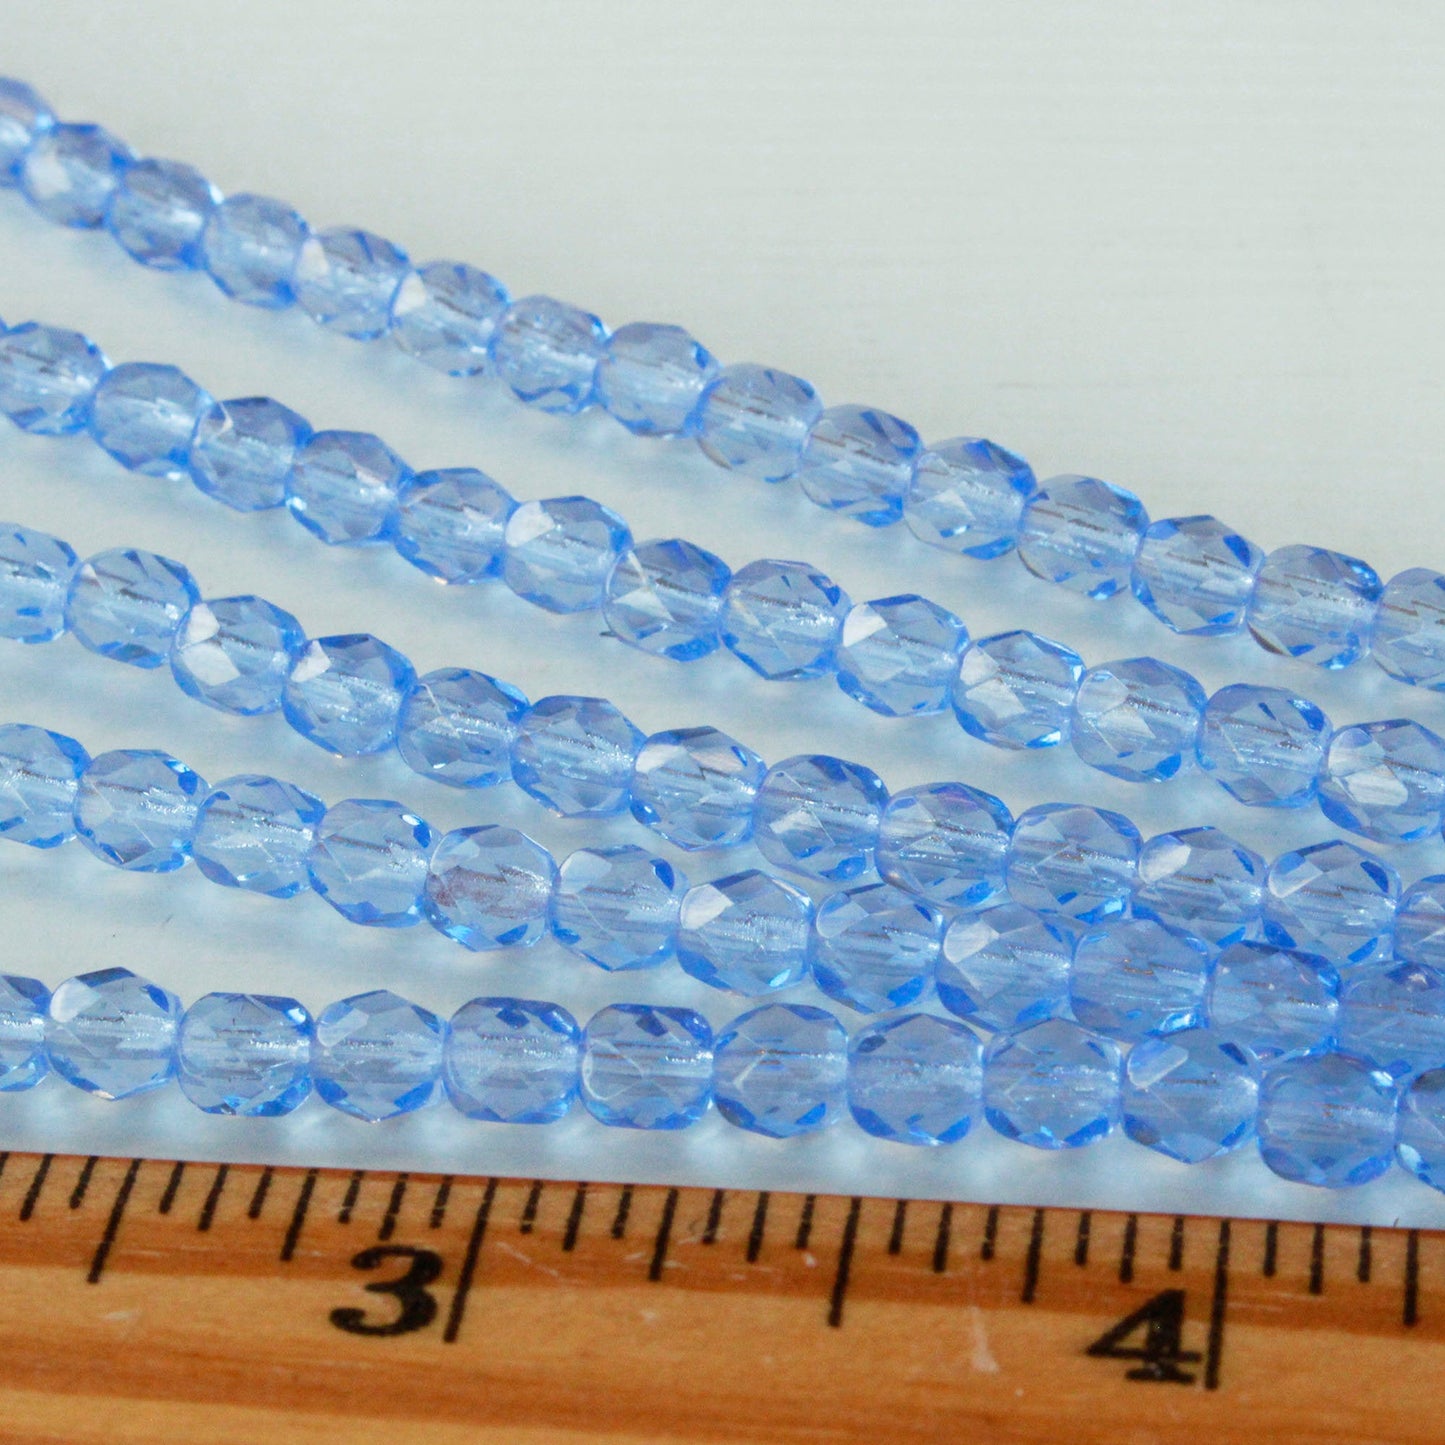 5mm and 8mm Round Glass Beads - Sapphire Blue - Choose Amount